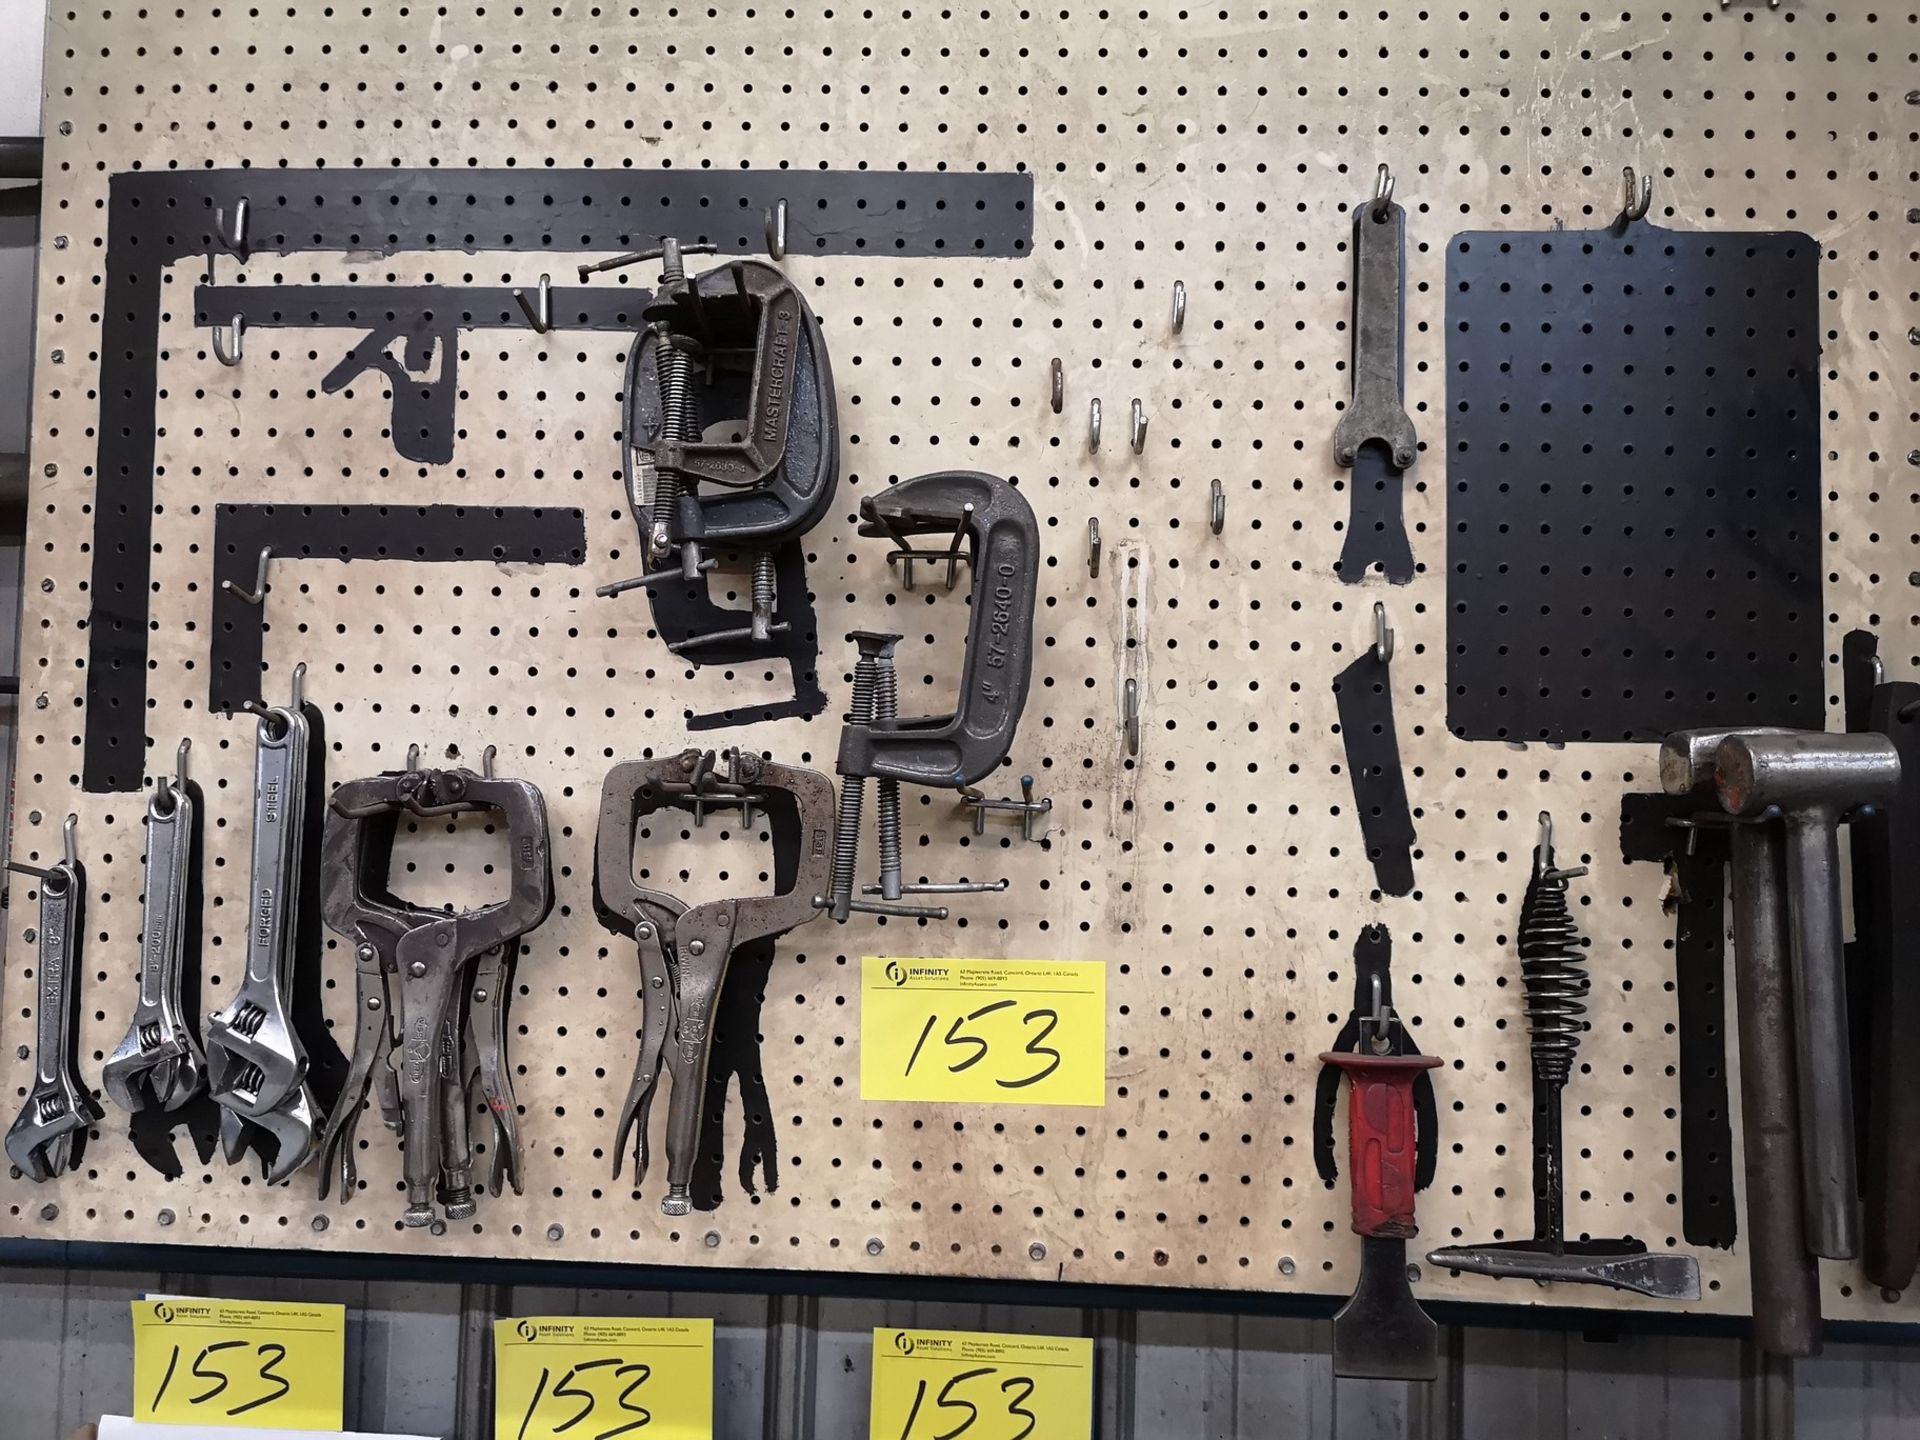 LOT OF HAND TOOLS INCL. VISE GRIPS, MEASURE TAPES, FILES, CLAMPS, SNIPERS, PLIERS,SCREWDRIVERS, - Image 2 of 4